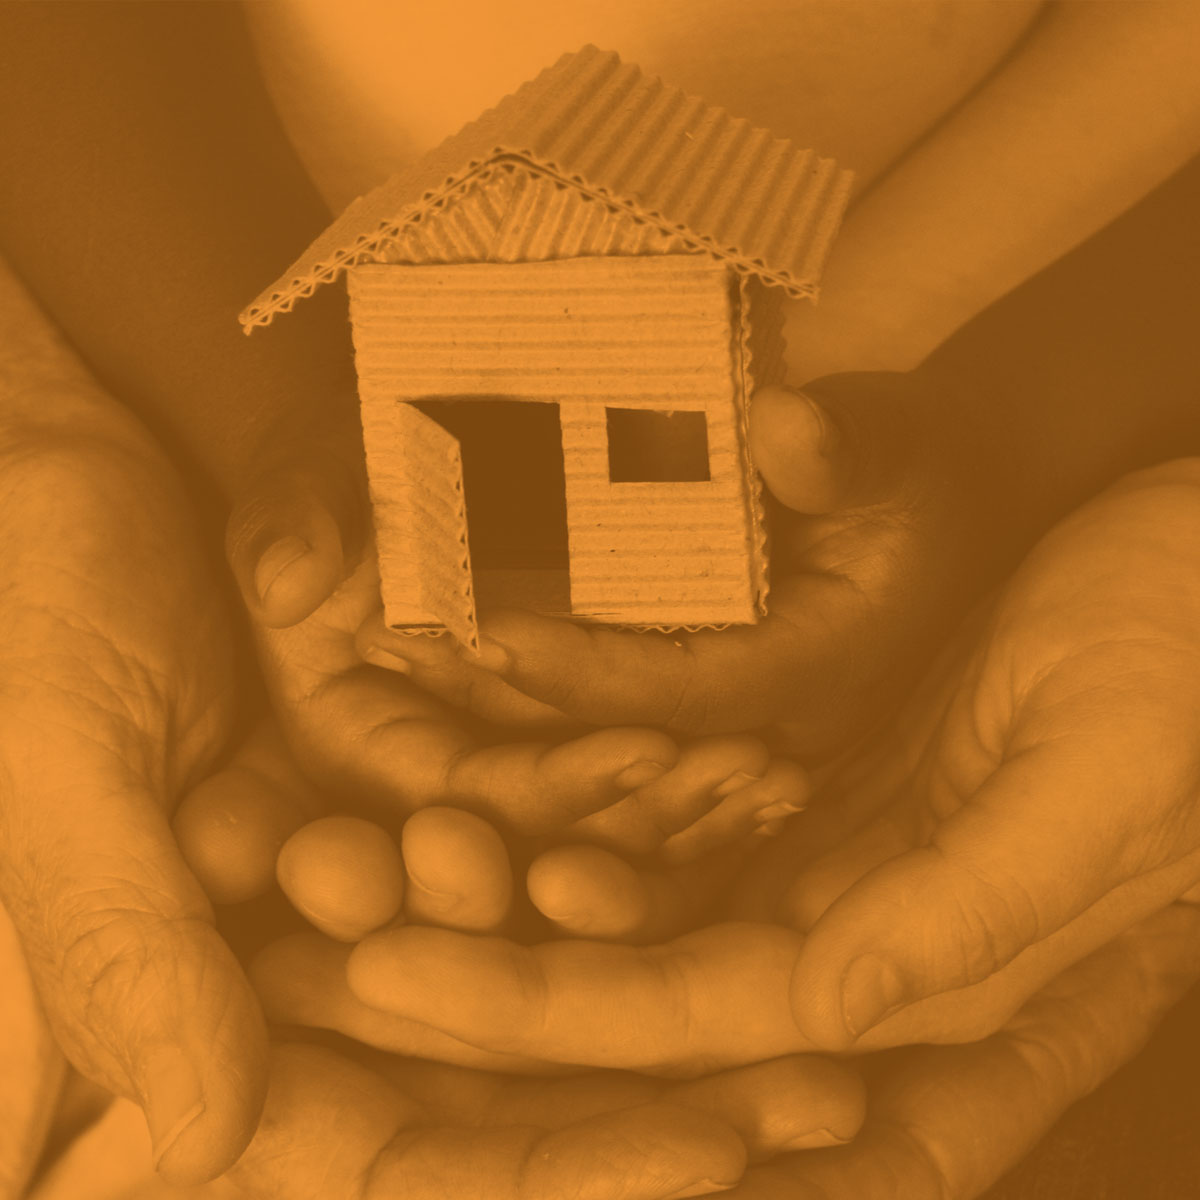 MIFA<br />
<small>Rapid Housing<br />
Emergency Shelter Placement<br />
24-hour Hotline for Homeless Families</small>